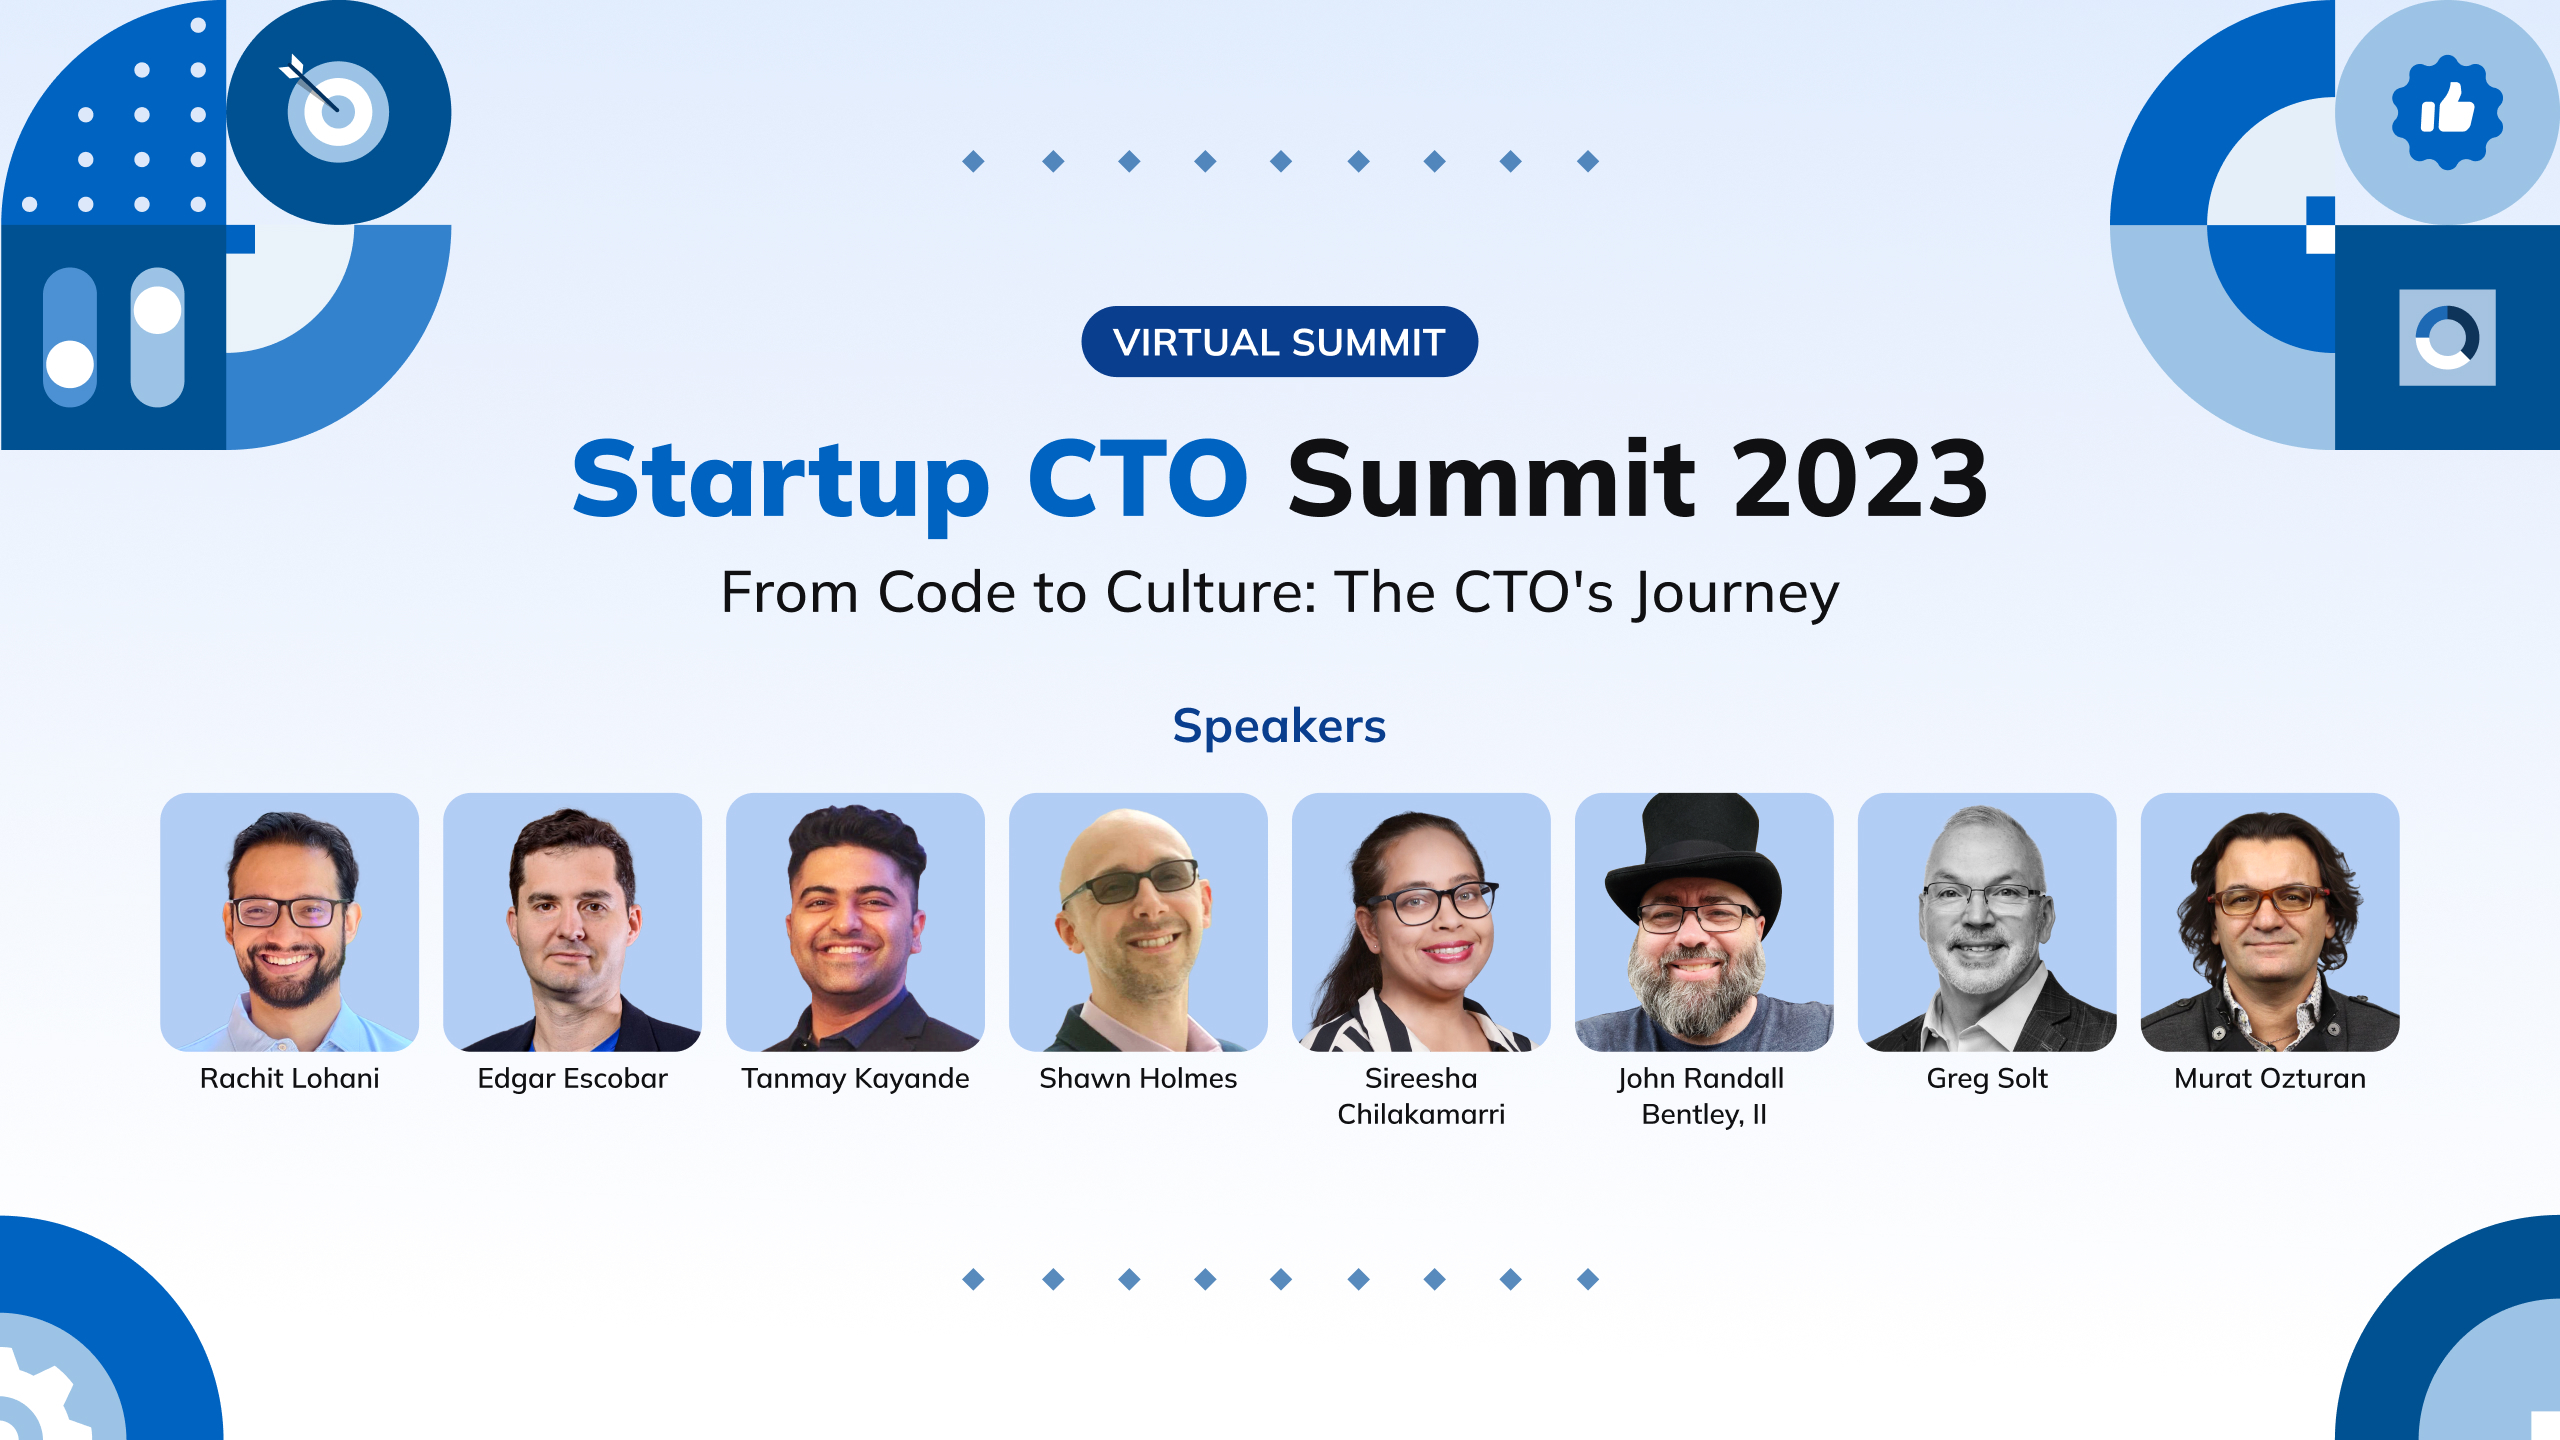 Startup CTO Summit 2023. From Code to Culture: The CTO's Journey, Online Event